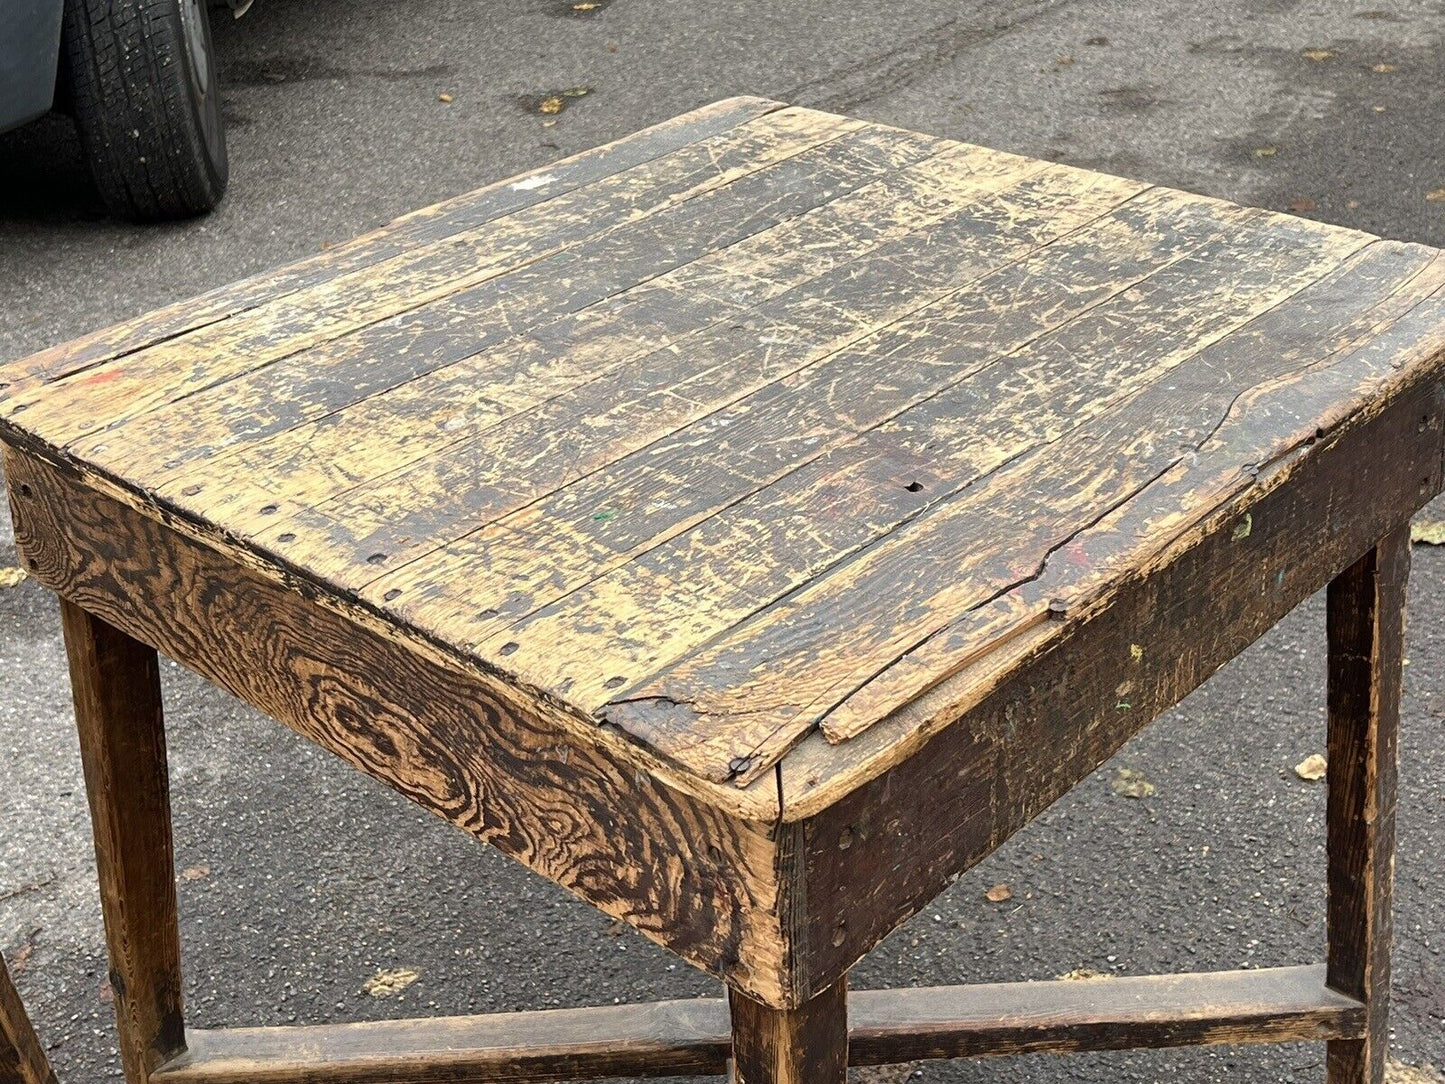 Antique Industrial Pine Work Tables